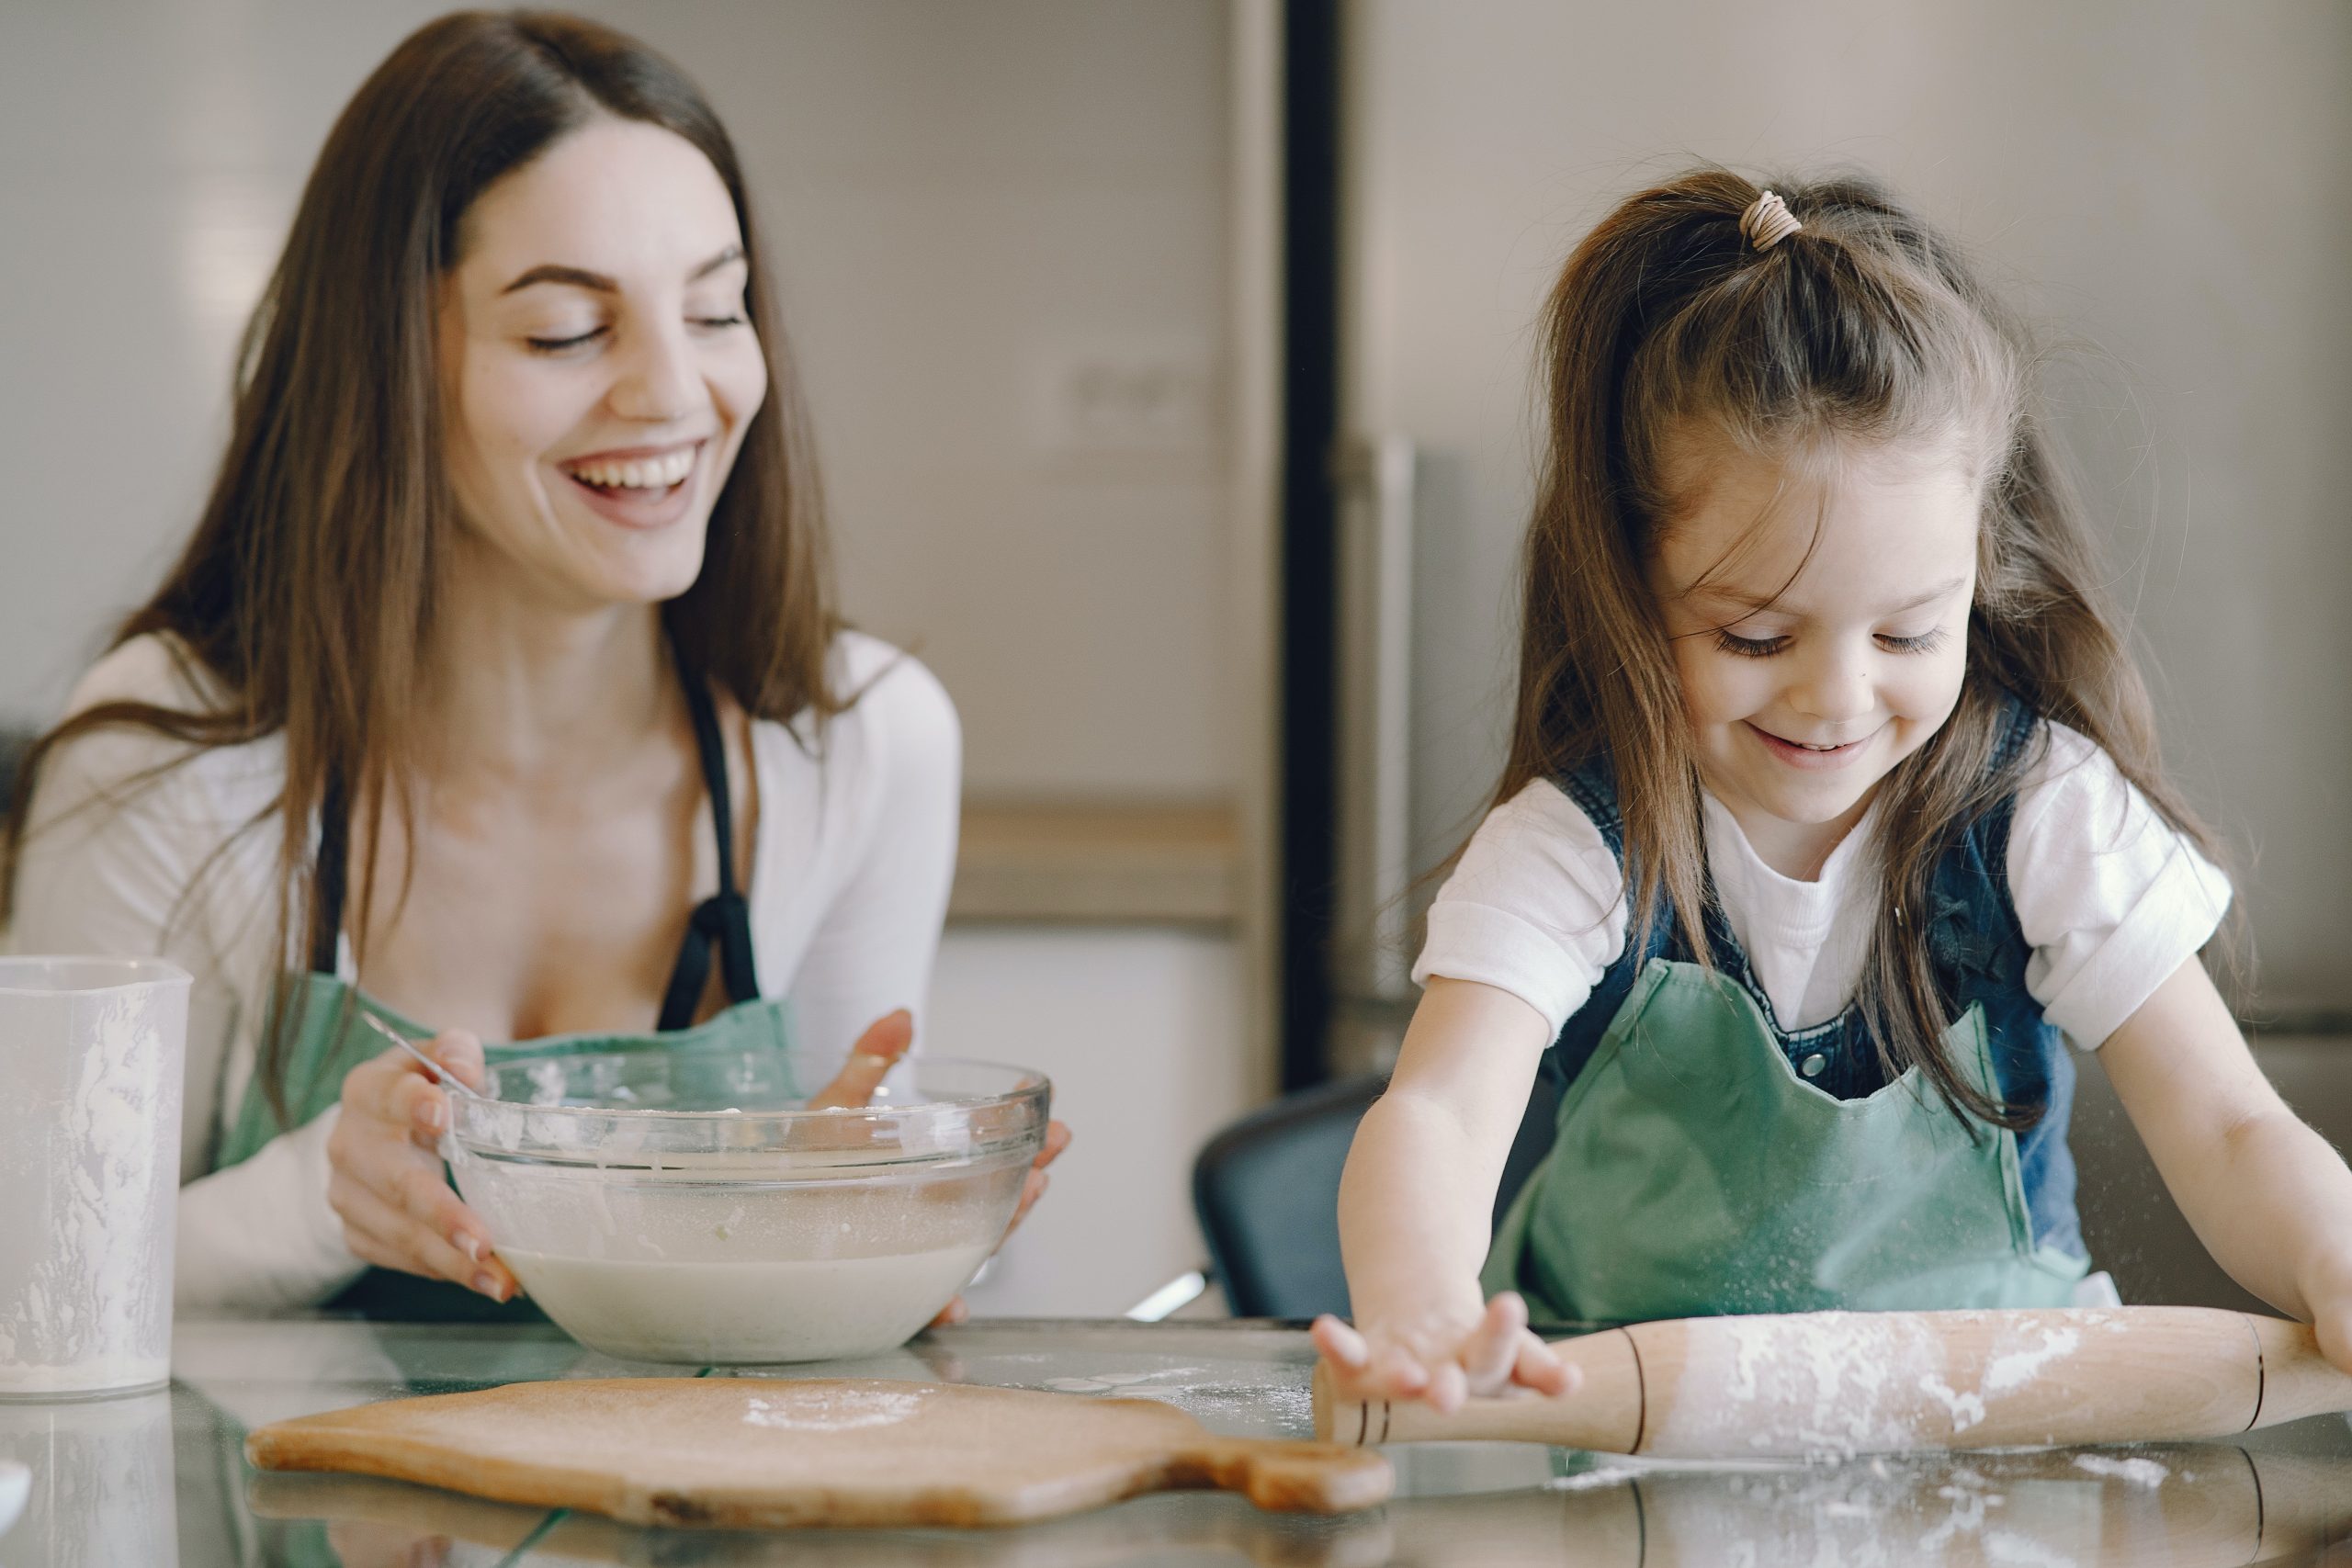 Family Activities to Do at Home - Bake Together